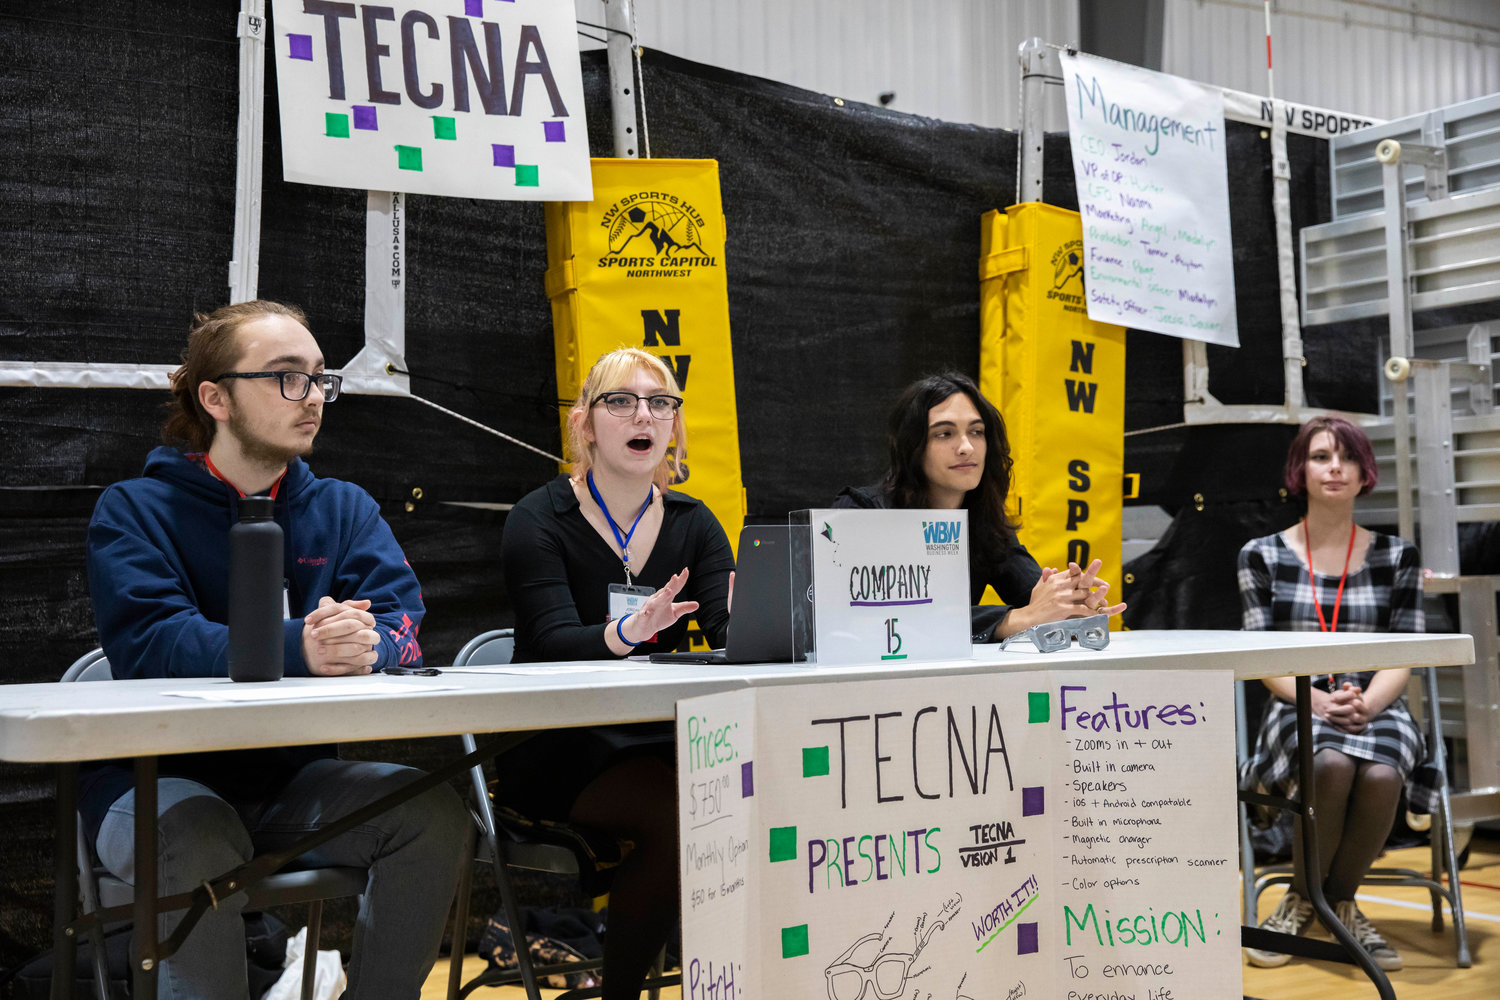 The TECNA company presents to judges during Washington Business Week Wednesday morning at the Northwest Sports Hub.